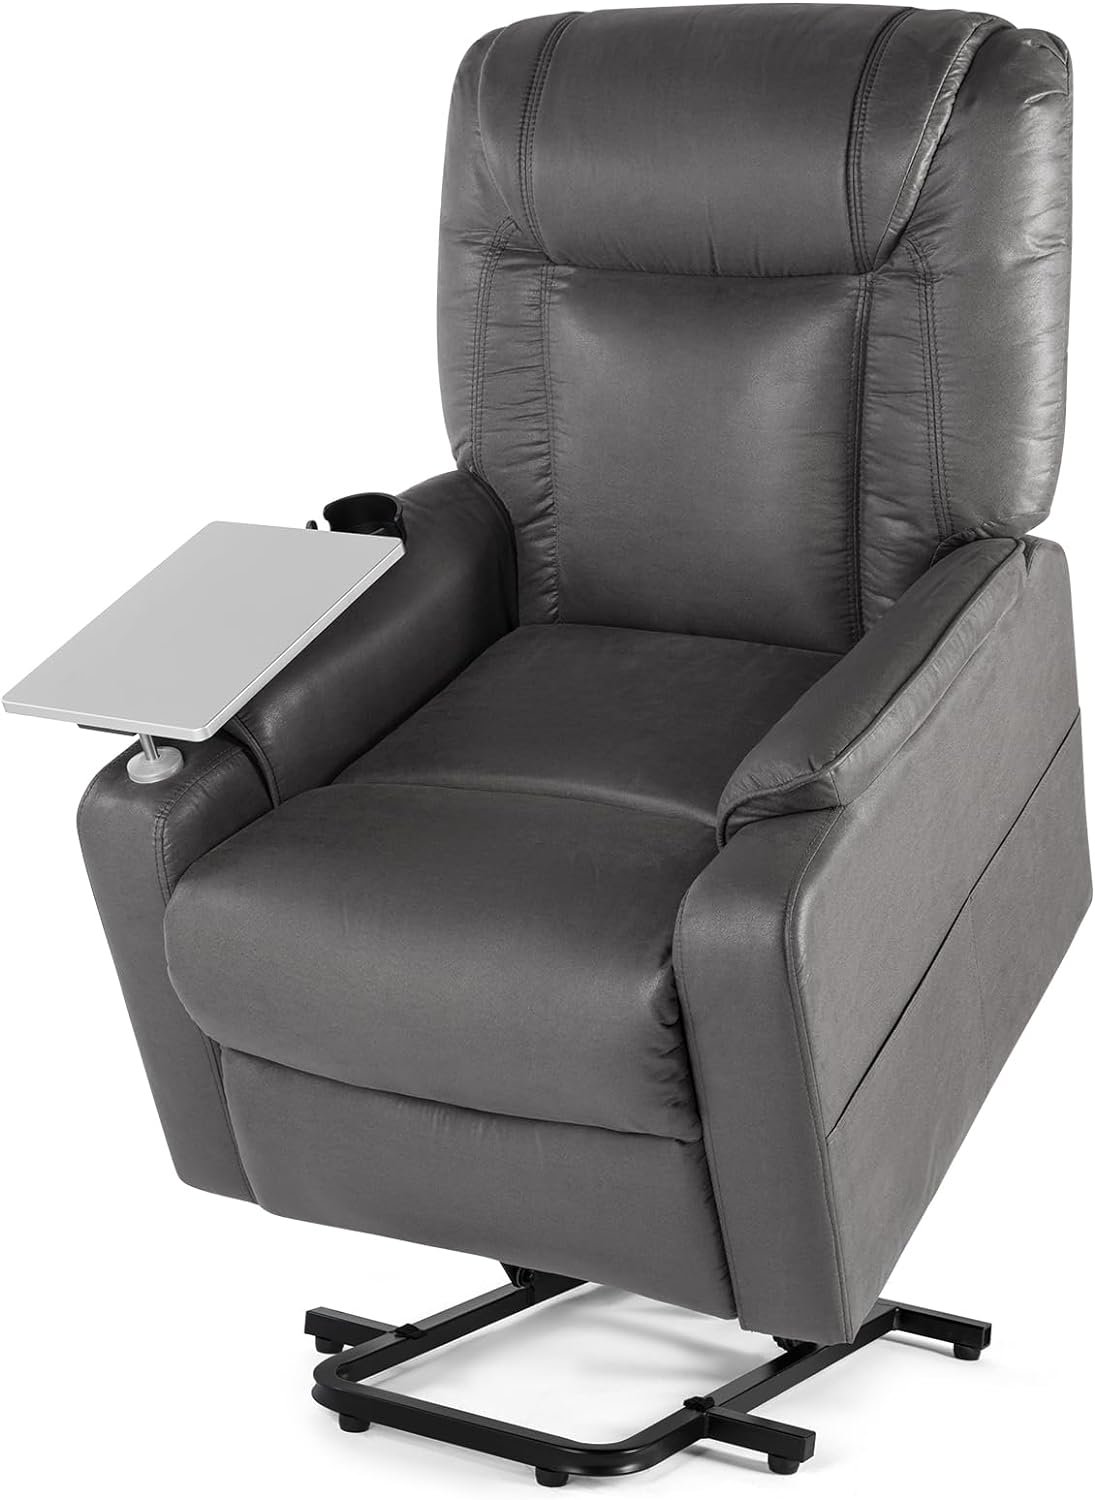 Leather Recliner Lounge Chair, 8 Point Massage Relax Ergonomic Lift Snuggling Sofa,Leathaire Material Massage Single Chair,with Detachable Tray Table Cup Holder Lumbar Heated Remote Control